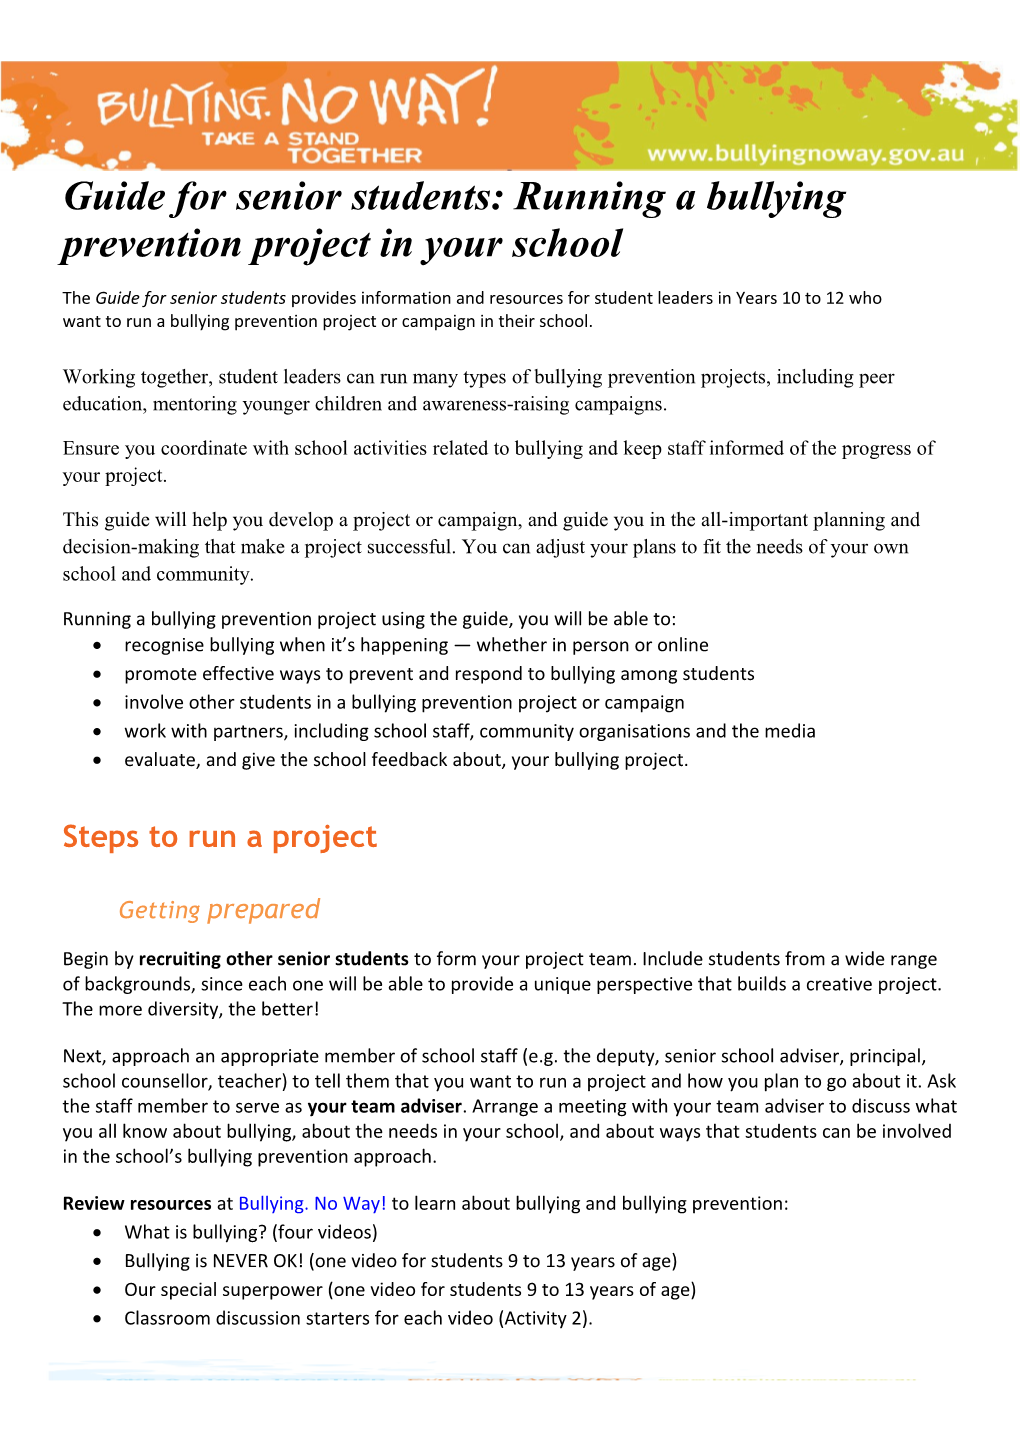 Guide for Senior Students: Running a Bullying Prevention Project in Your School